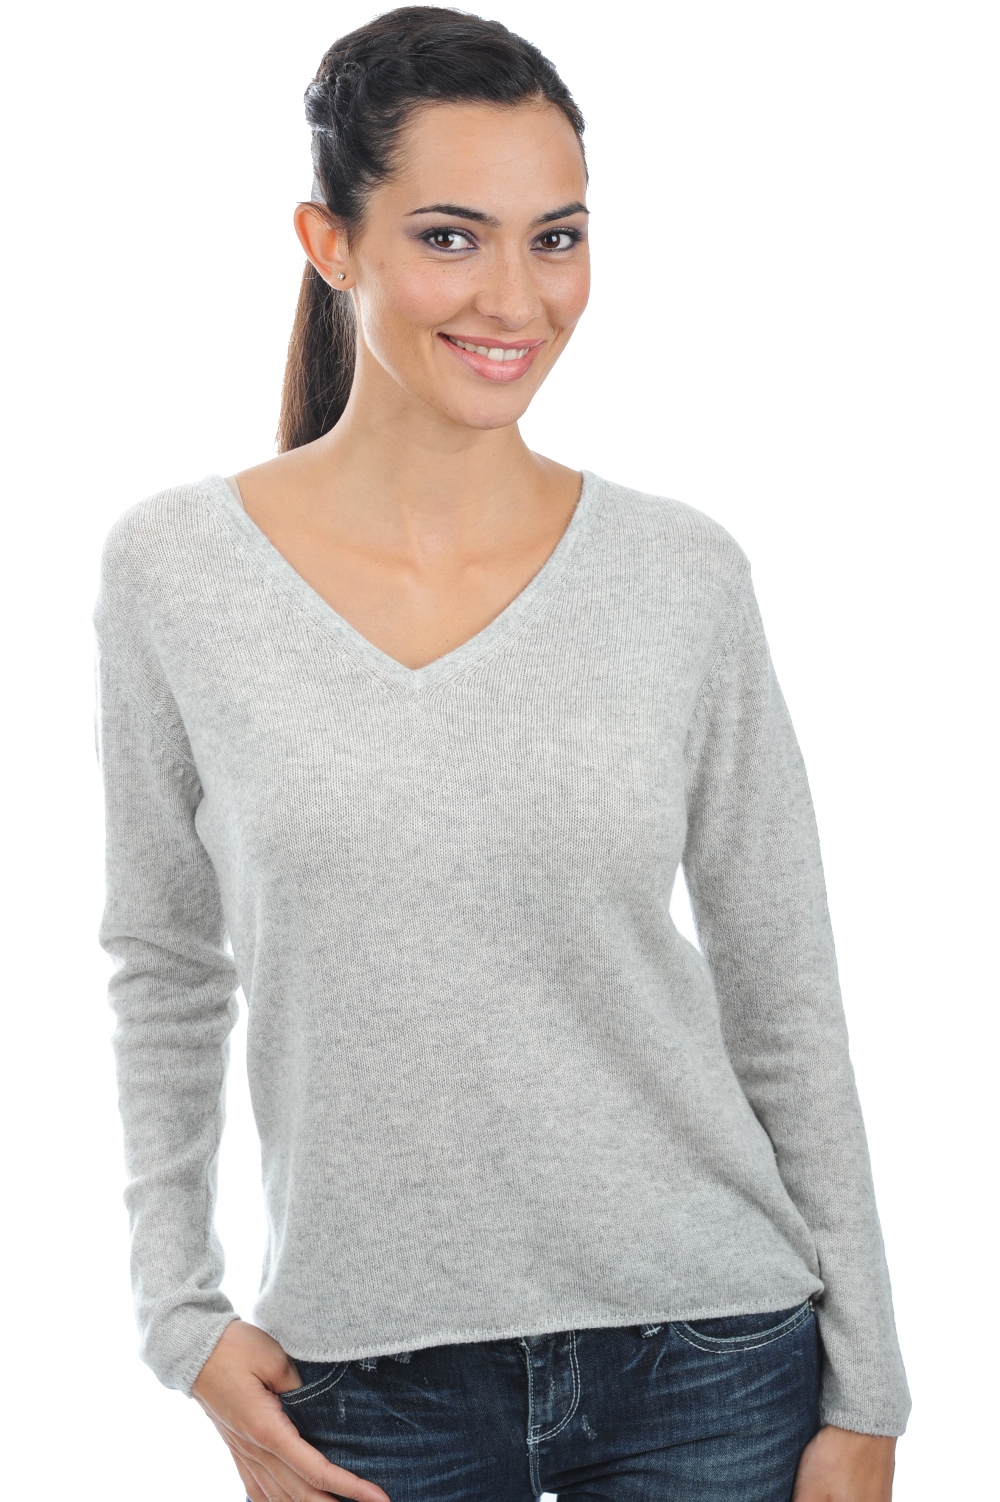 Cashmere ladies basic sweaters at low prices flavie flanelle chine 3xl